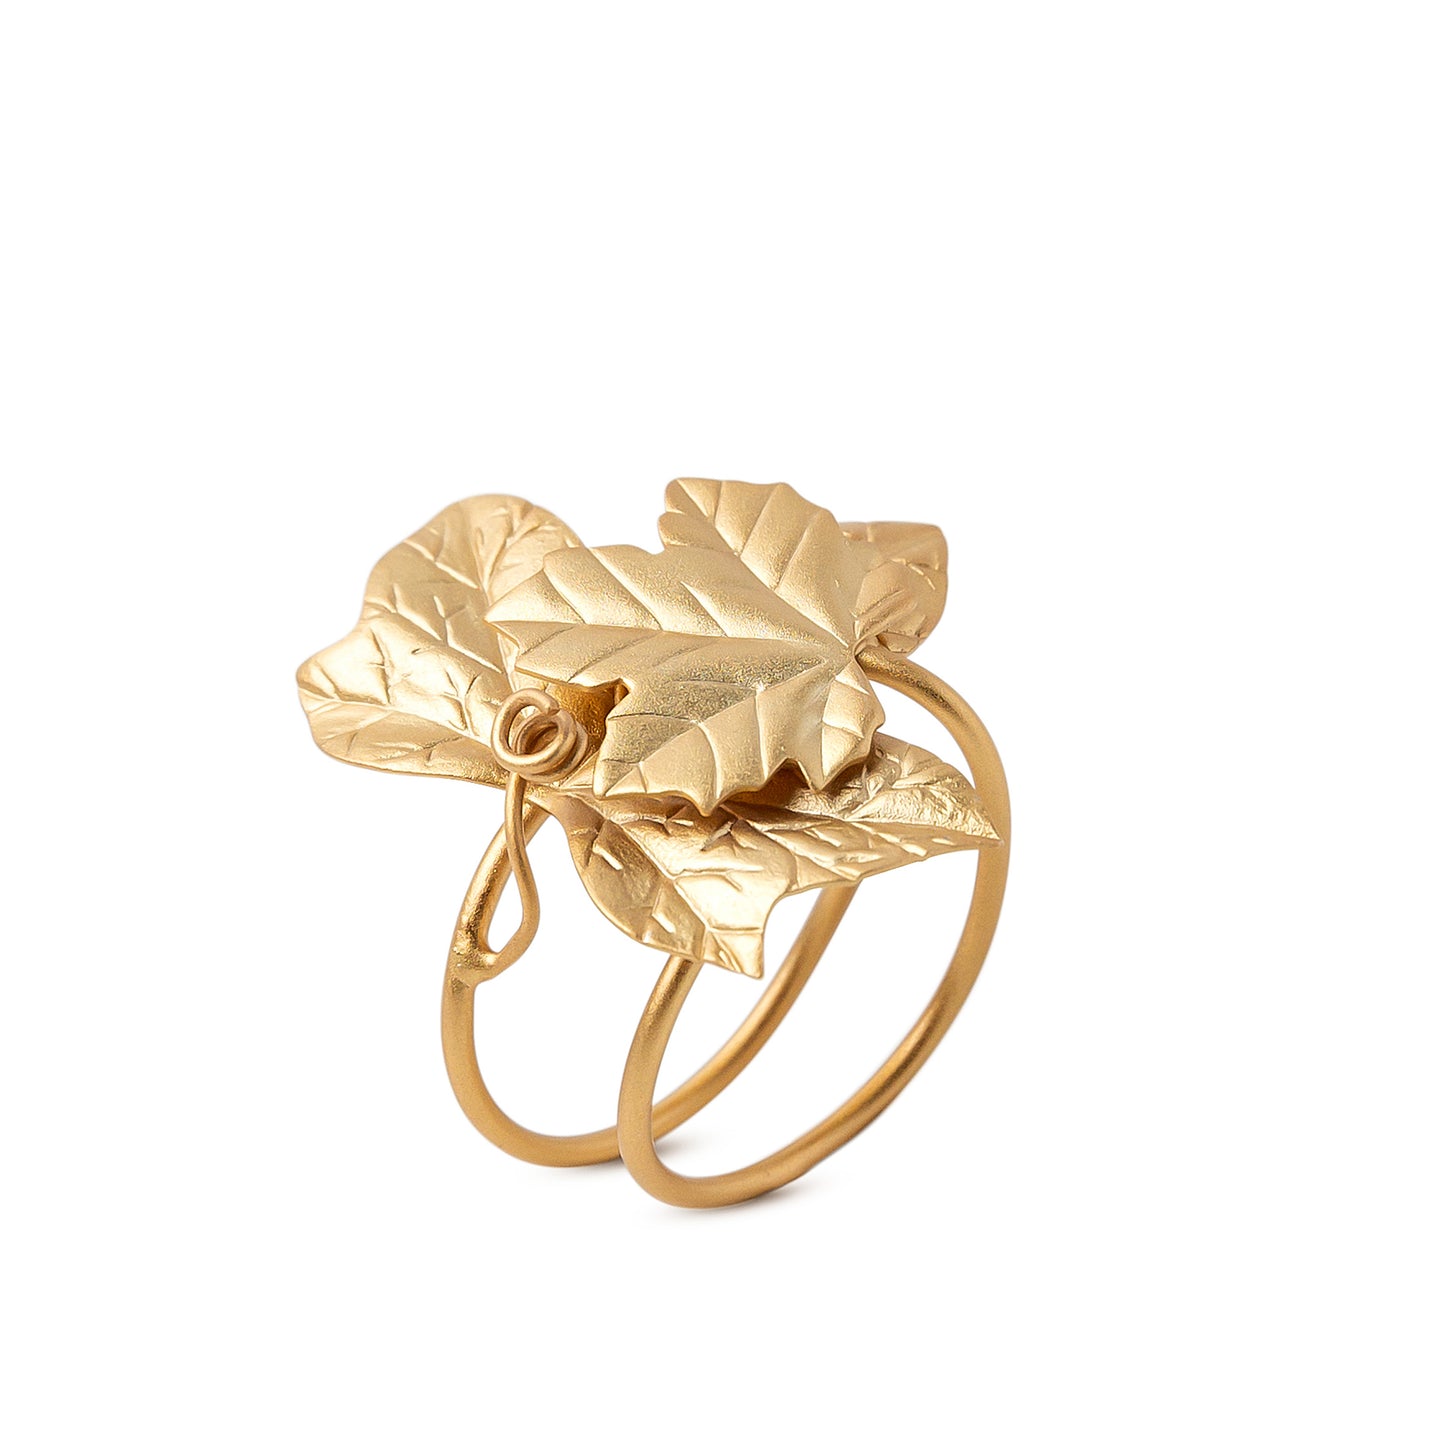 Bague réglable plaquée or 24 carats Ivy and Branches